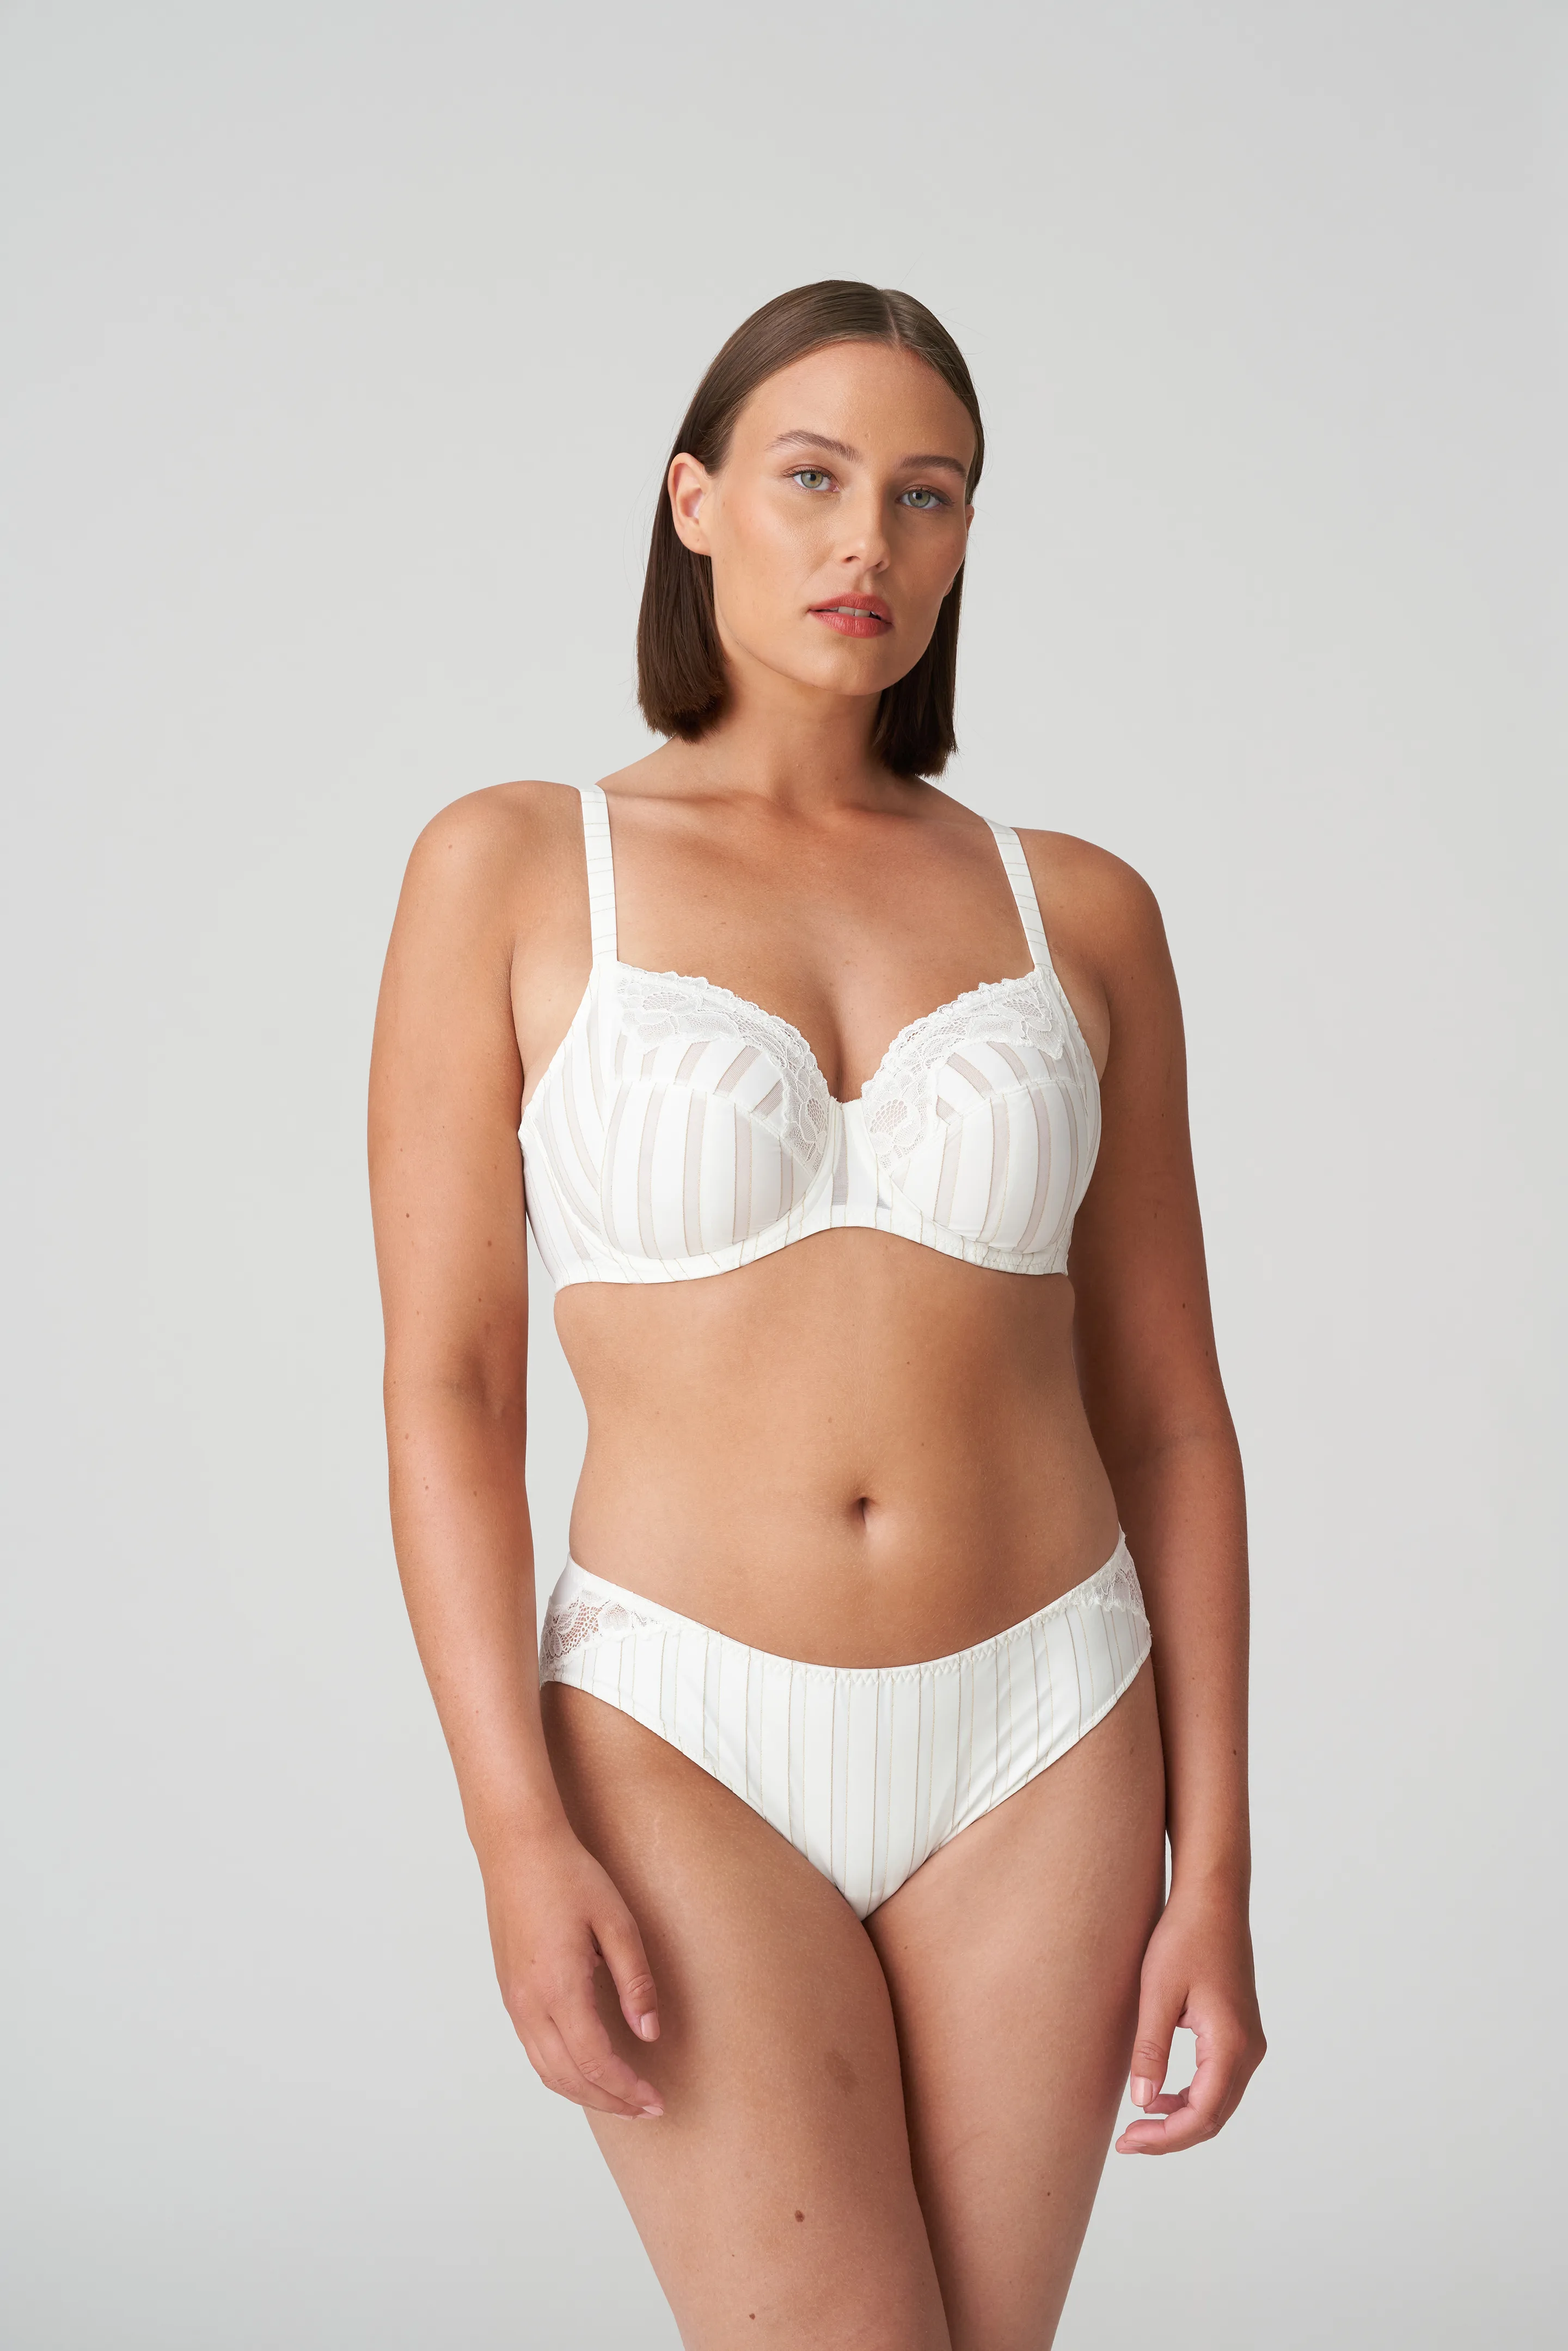 Prima Donna Women's -1815 Deauville I to K Cup Underwire Bra 016, White, 38I  at  Women's Clothing store